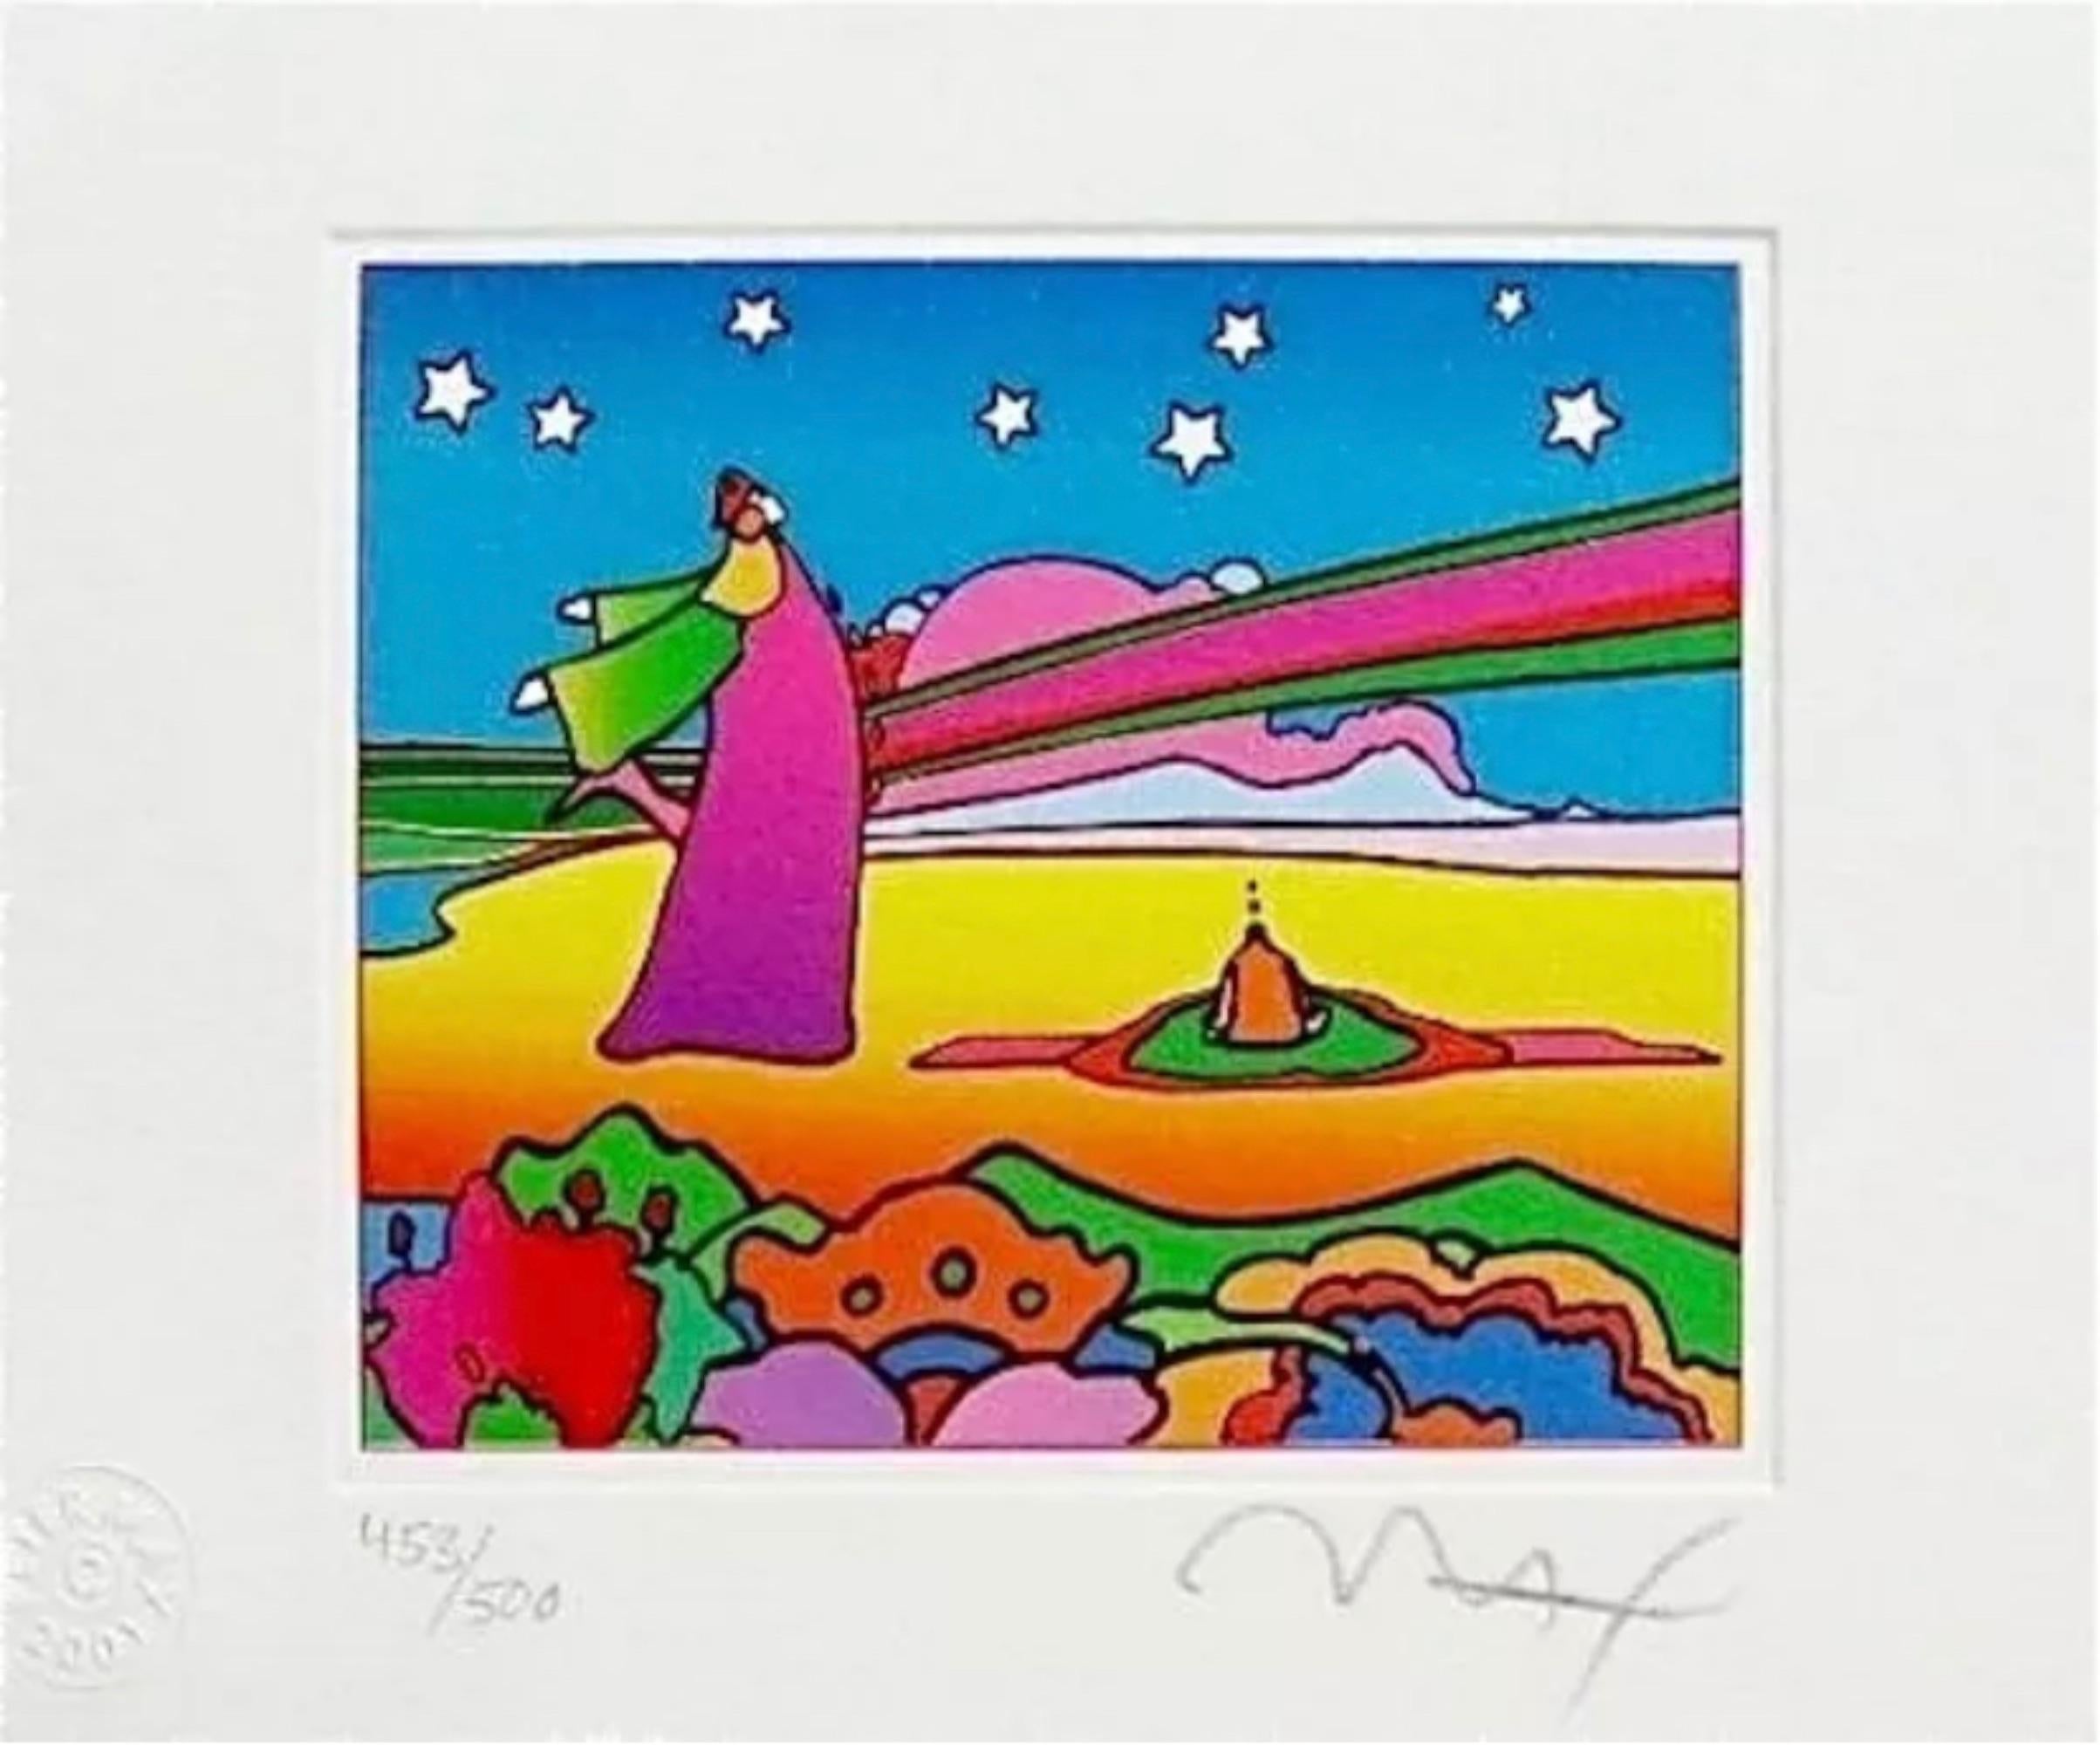 Artist: Peter Max (1937)
Title: Two Cosmic Sages, Version I
Year: 2001
Edition: 453/500, plus proofs
Medium: Lithograph on Lustro Saxony paper
Size: 4.5 x 5.5 inches
Condition: Excellent
Inscription: Signed and numbered by the artist.
Notes: